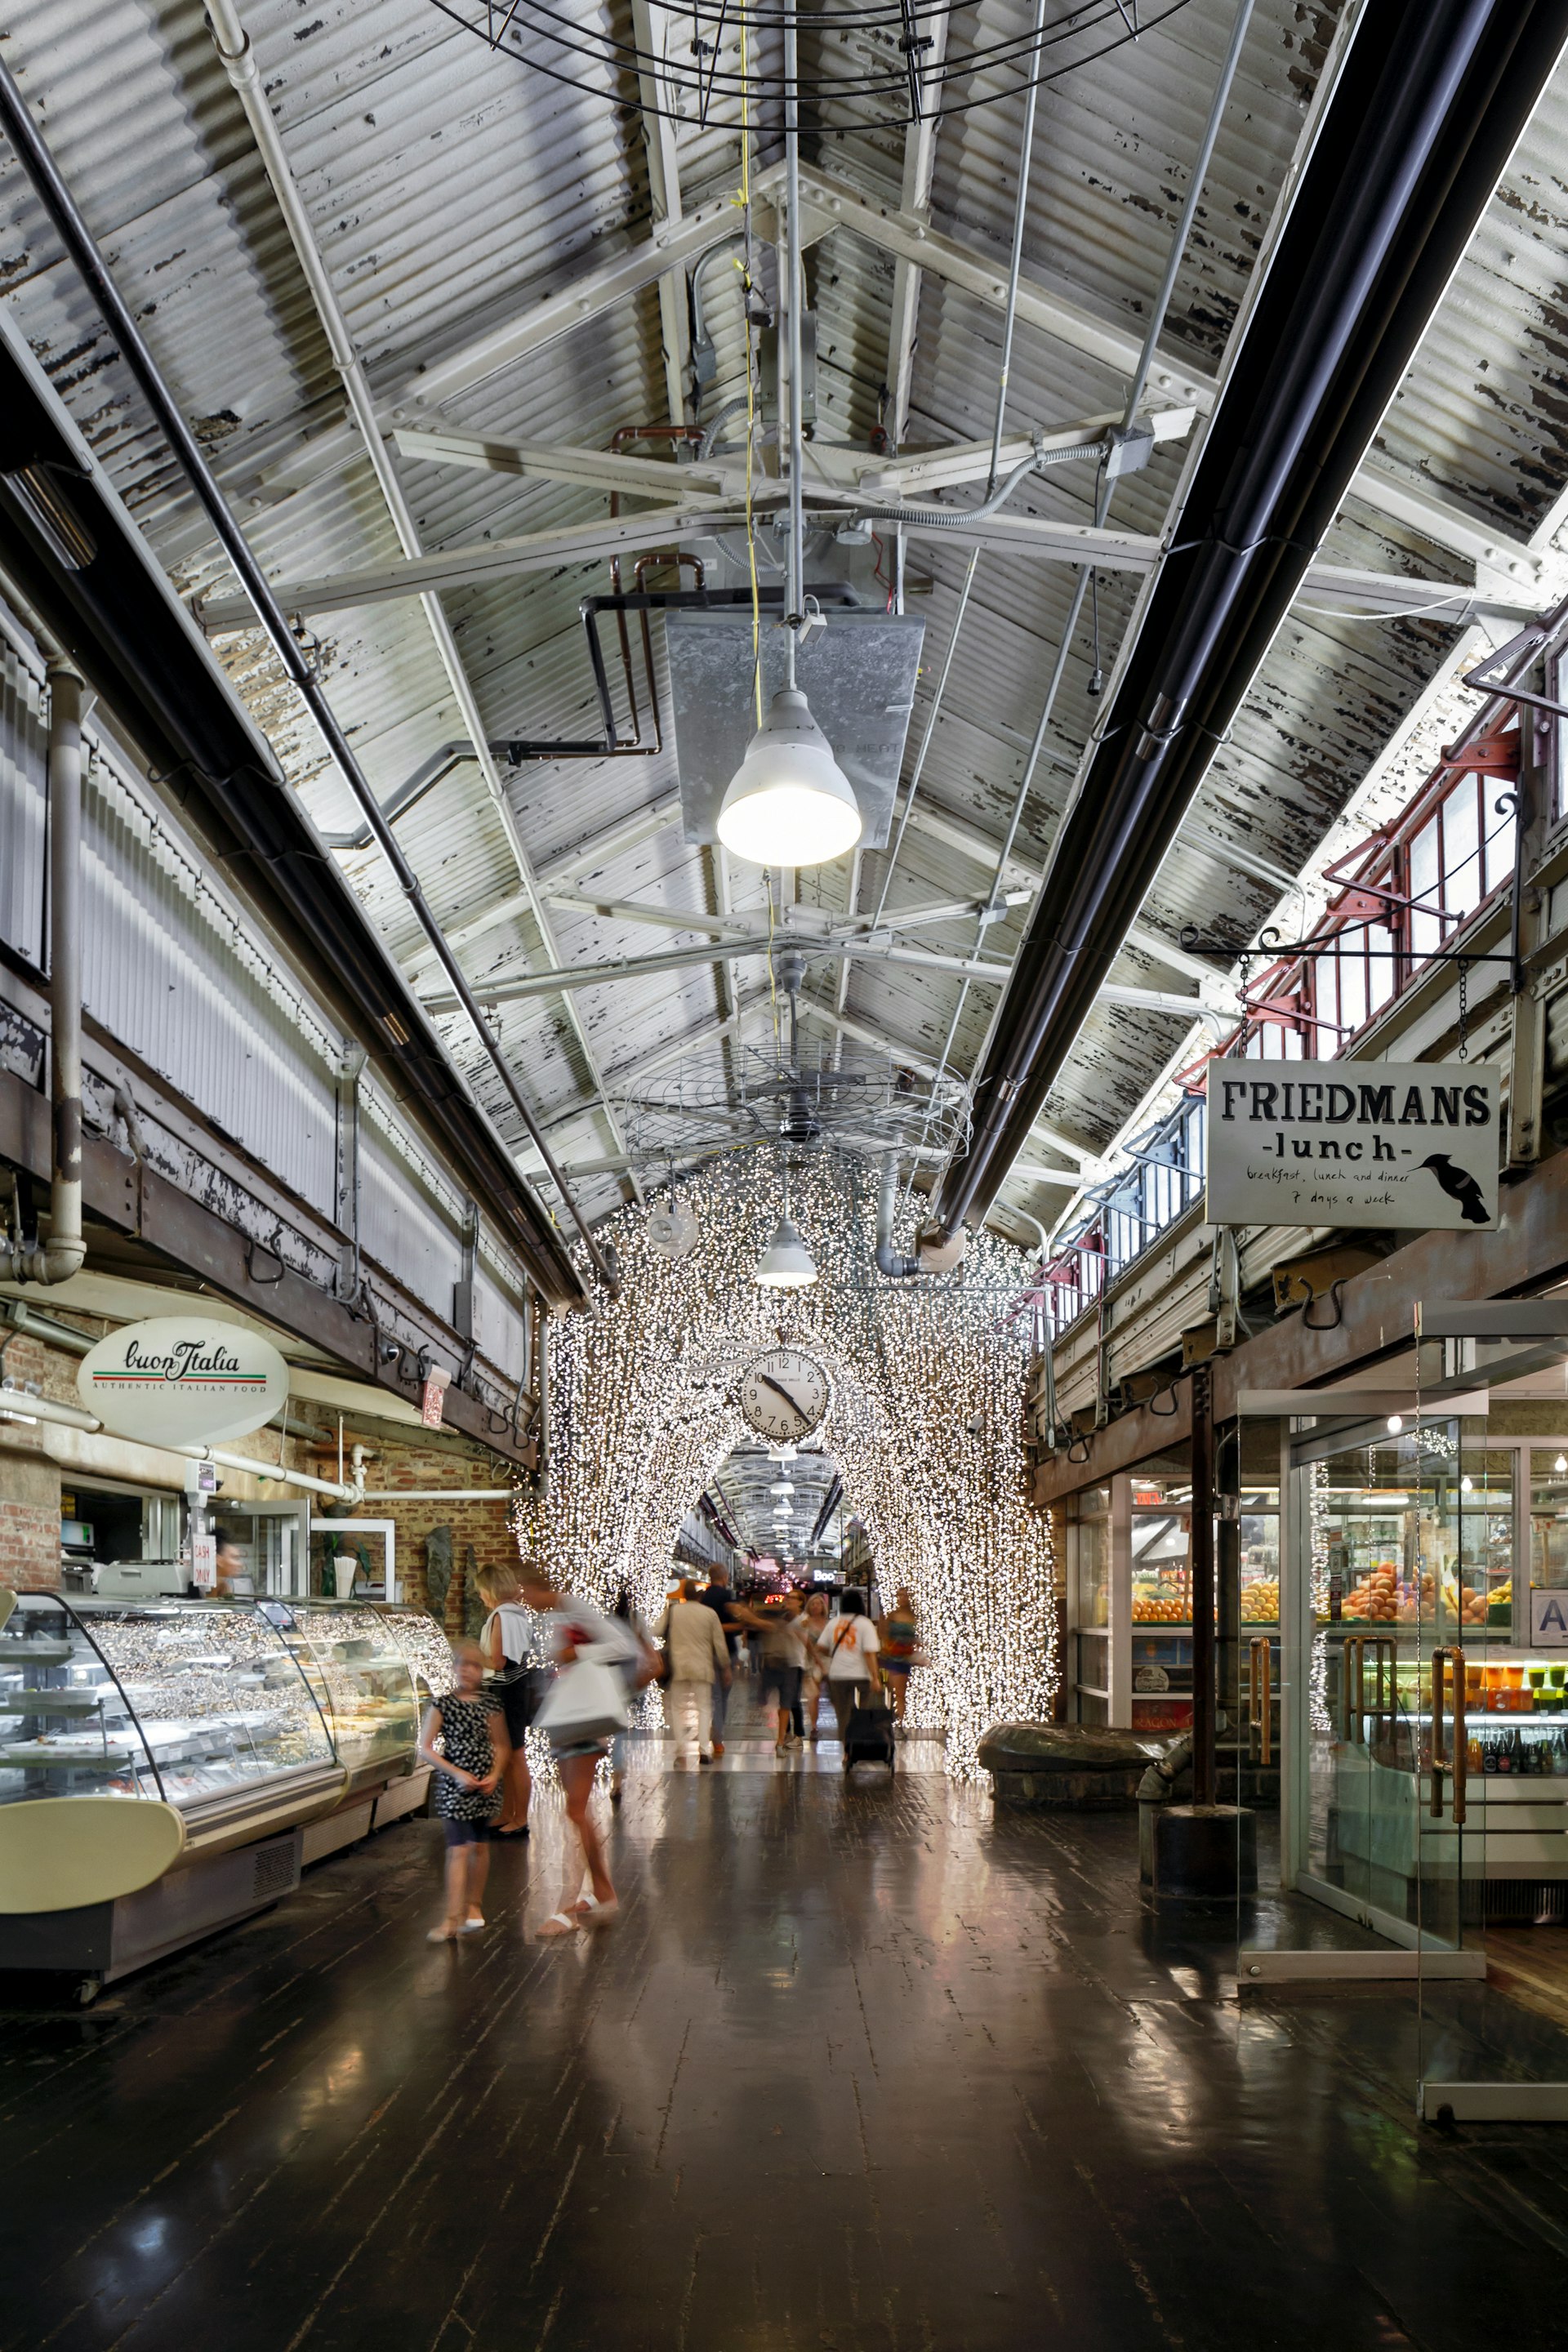 Inside a former industrial building turned food hall, with bright lights and cool shops